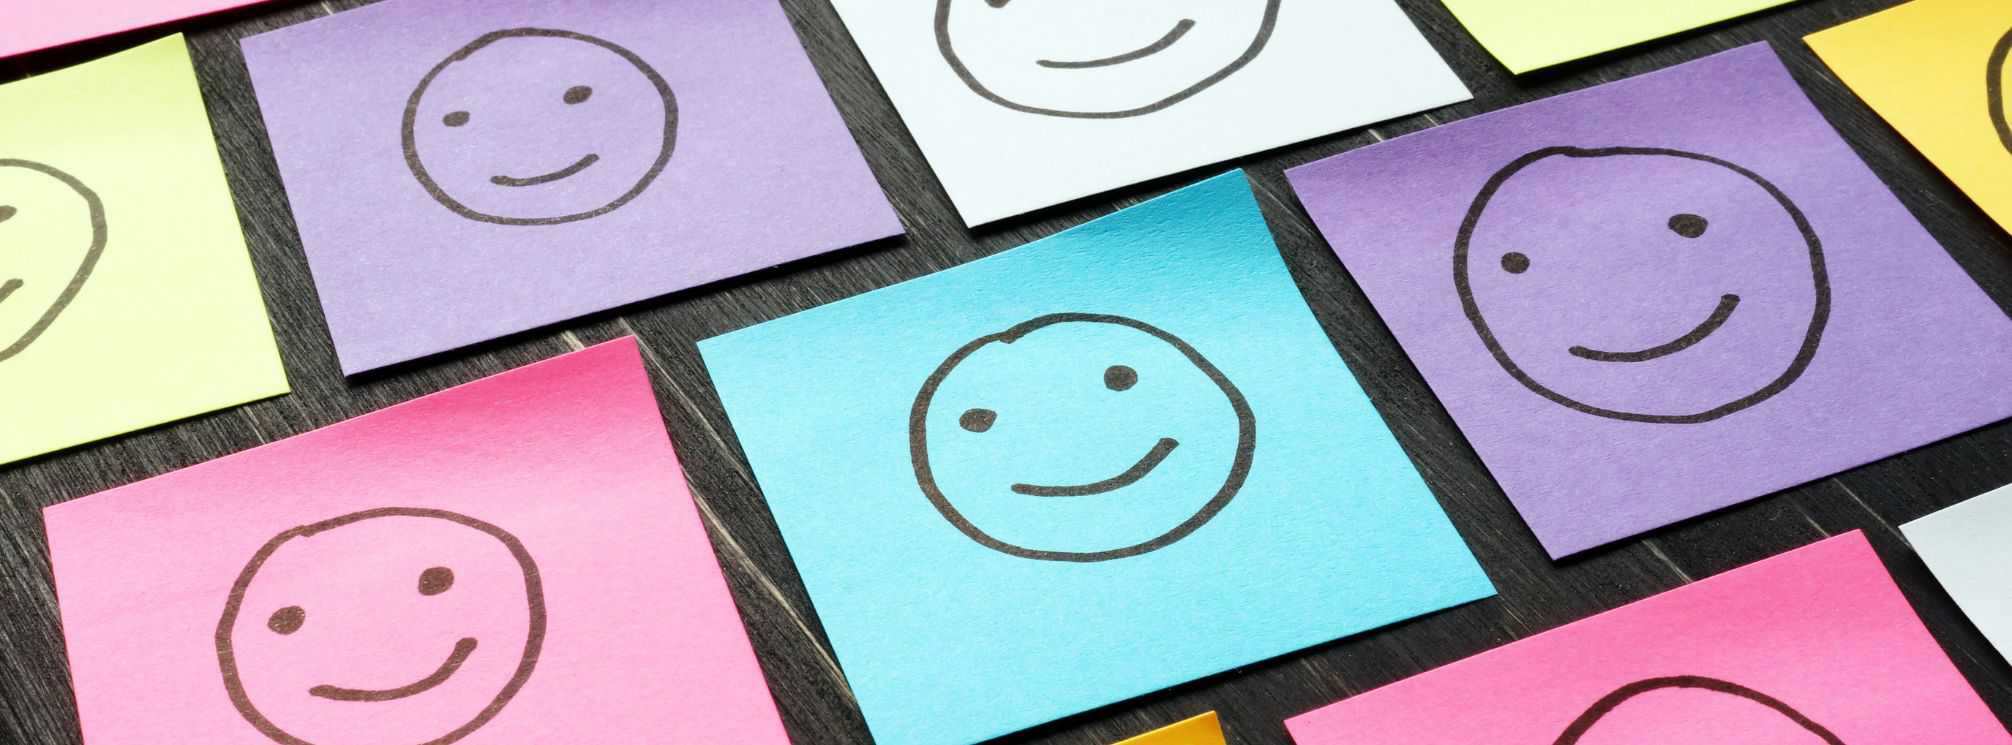 multi-color sticky notes arranged neatly on a black desk with smiley faces drawn on them